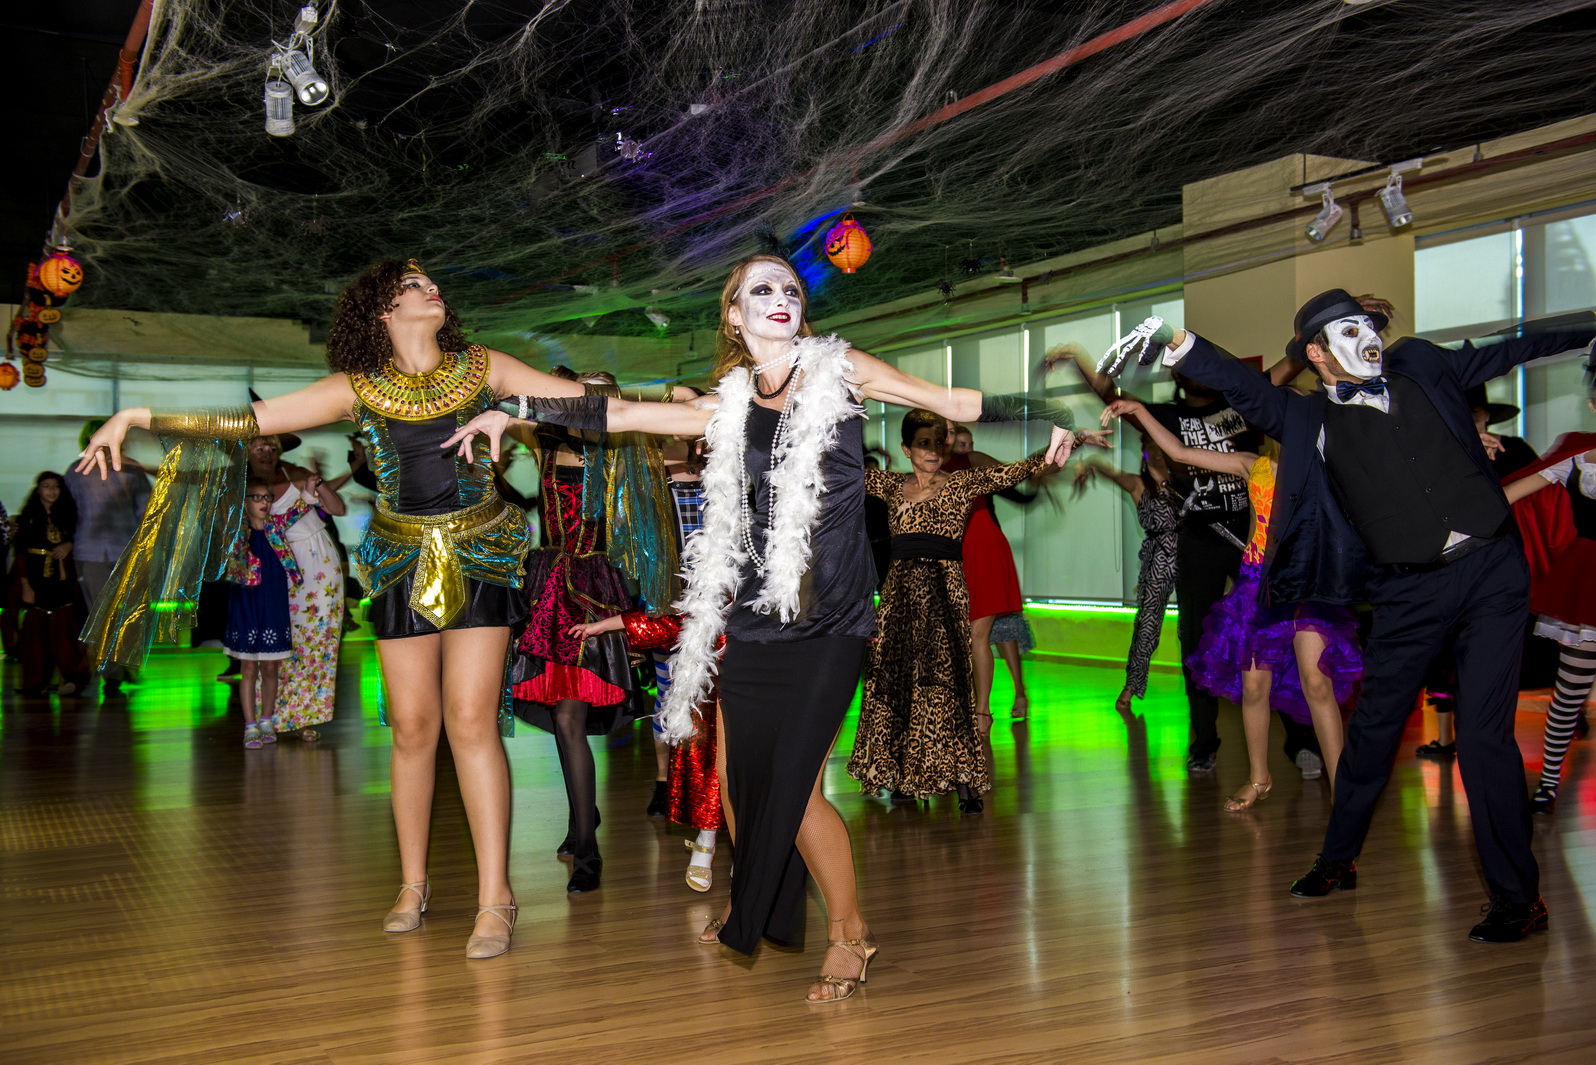 Book tickets for Halloween Dance Party 2016 in Dubai